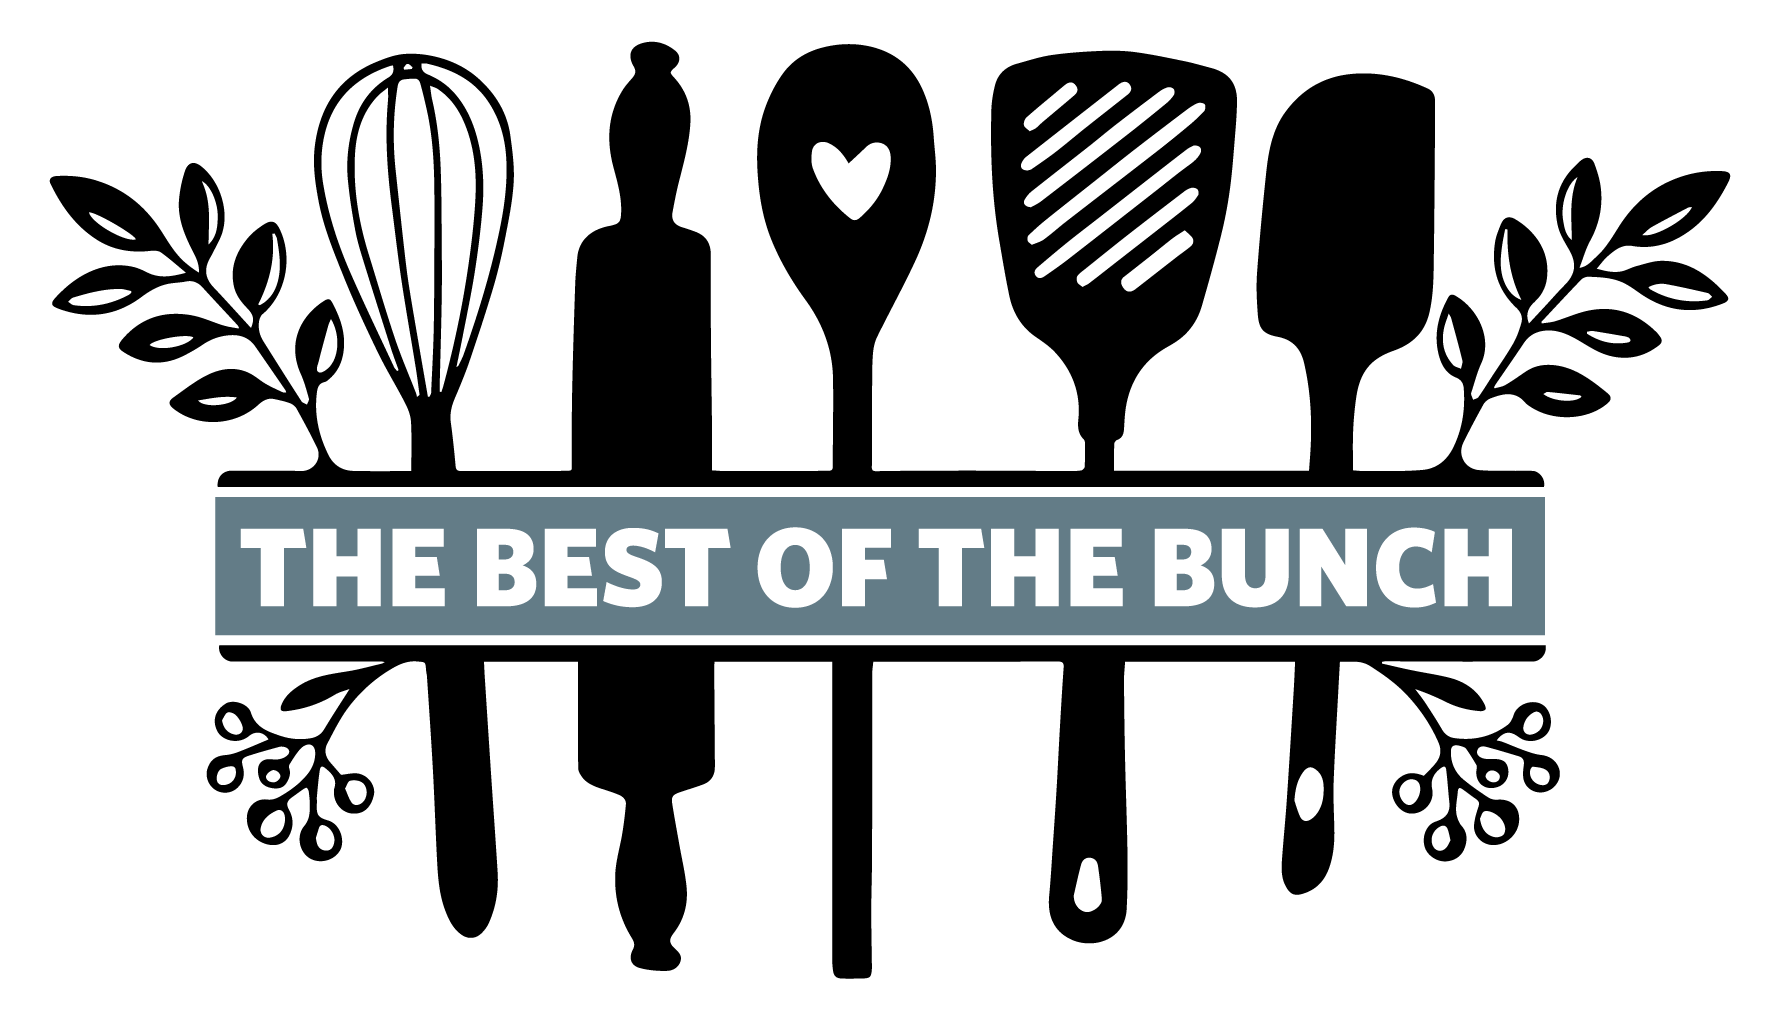 The Best of the Bunch logo